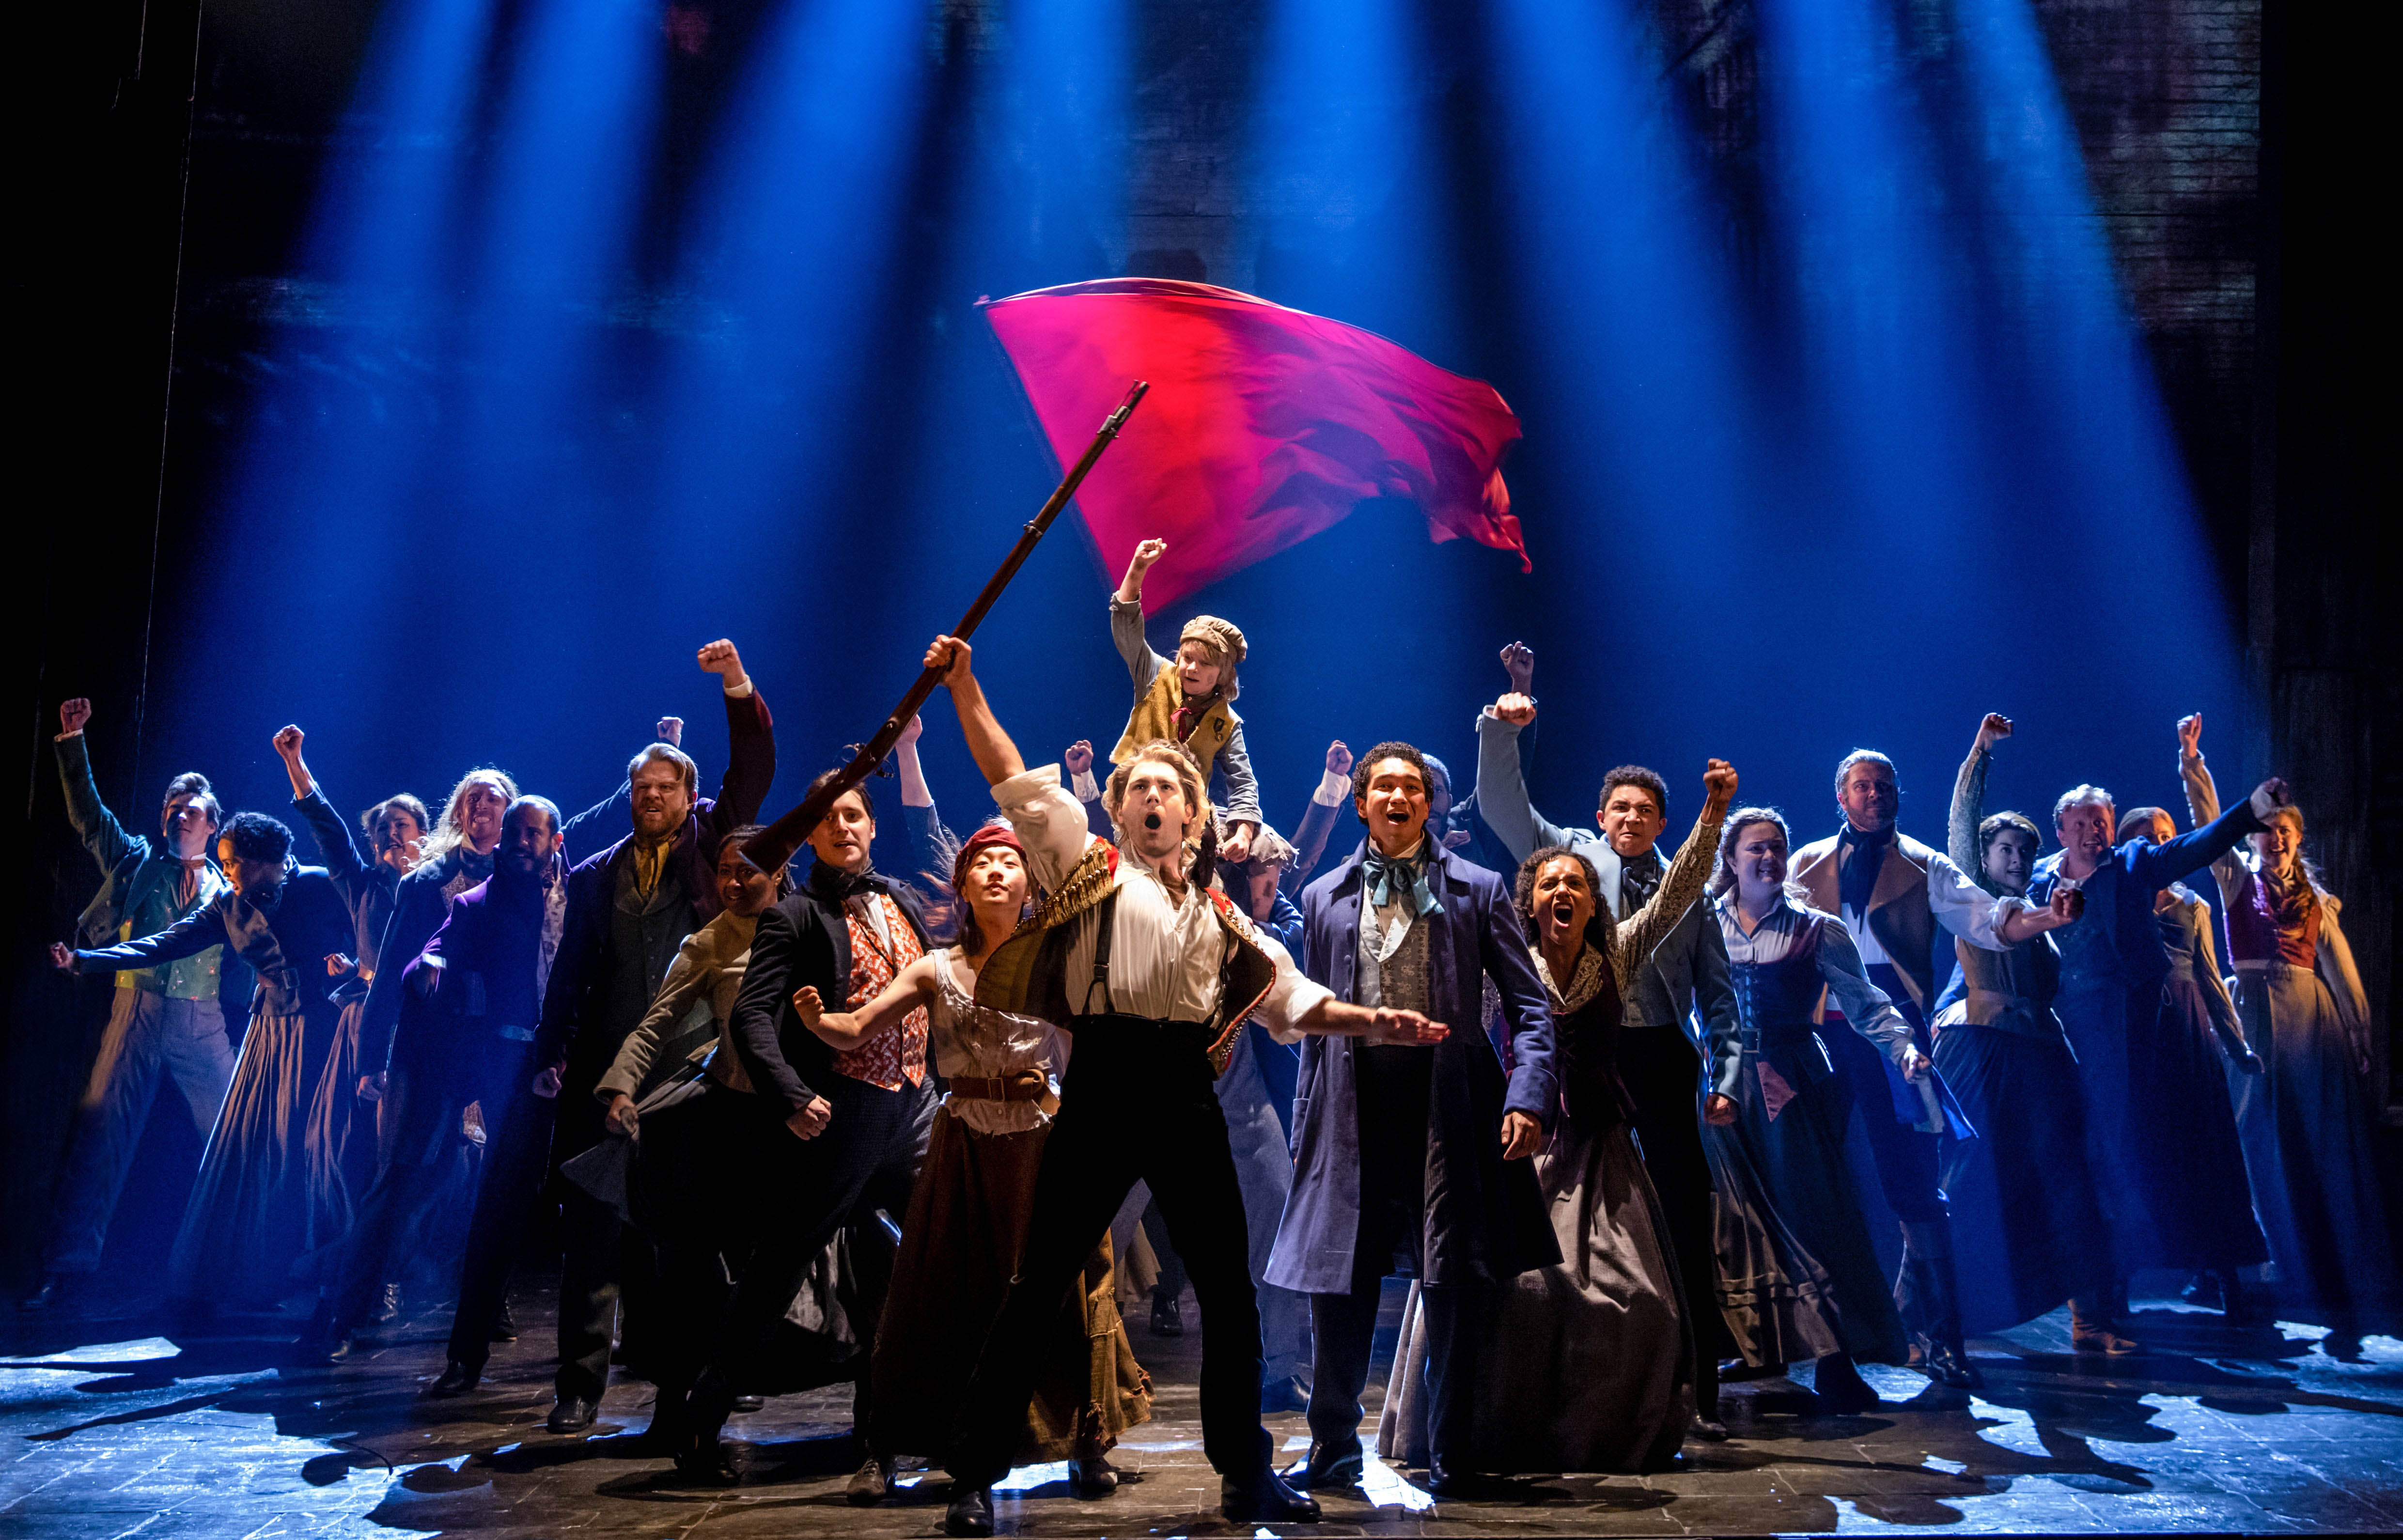 Theater Review The musical ‘Les Misérables’ offers stellar displays